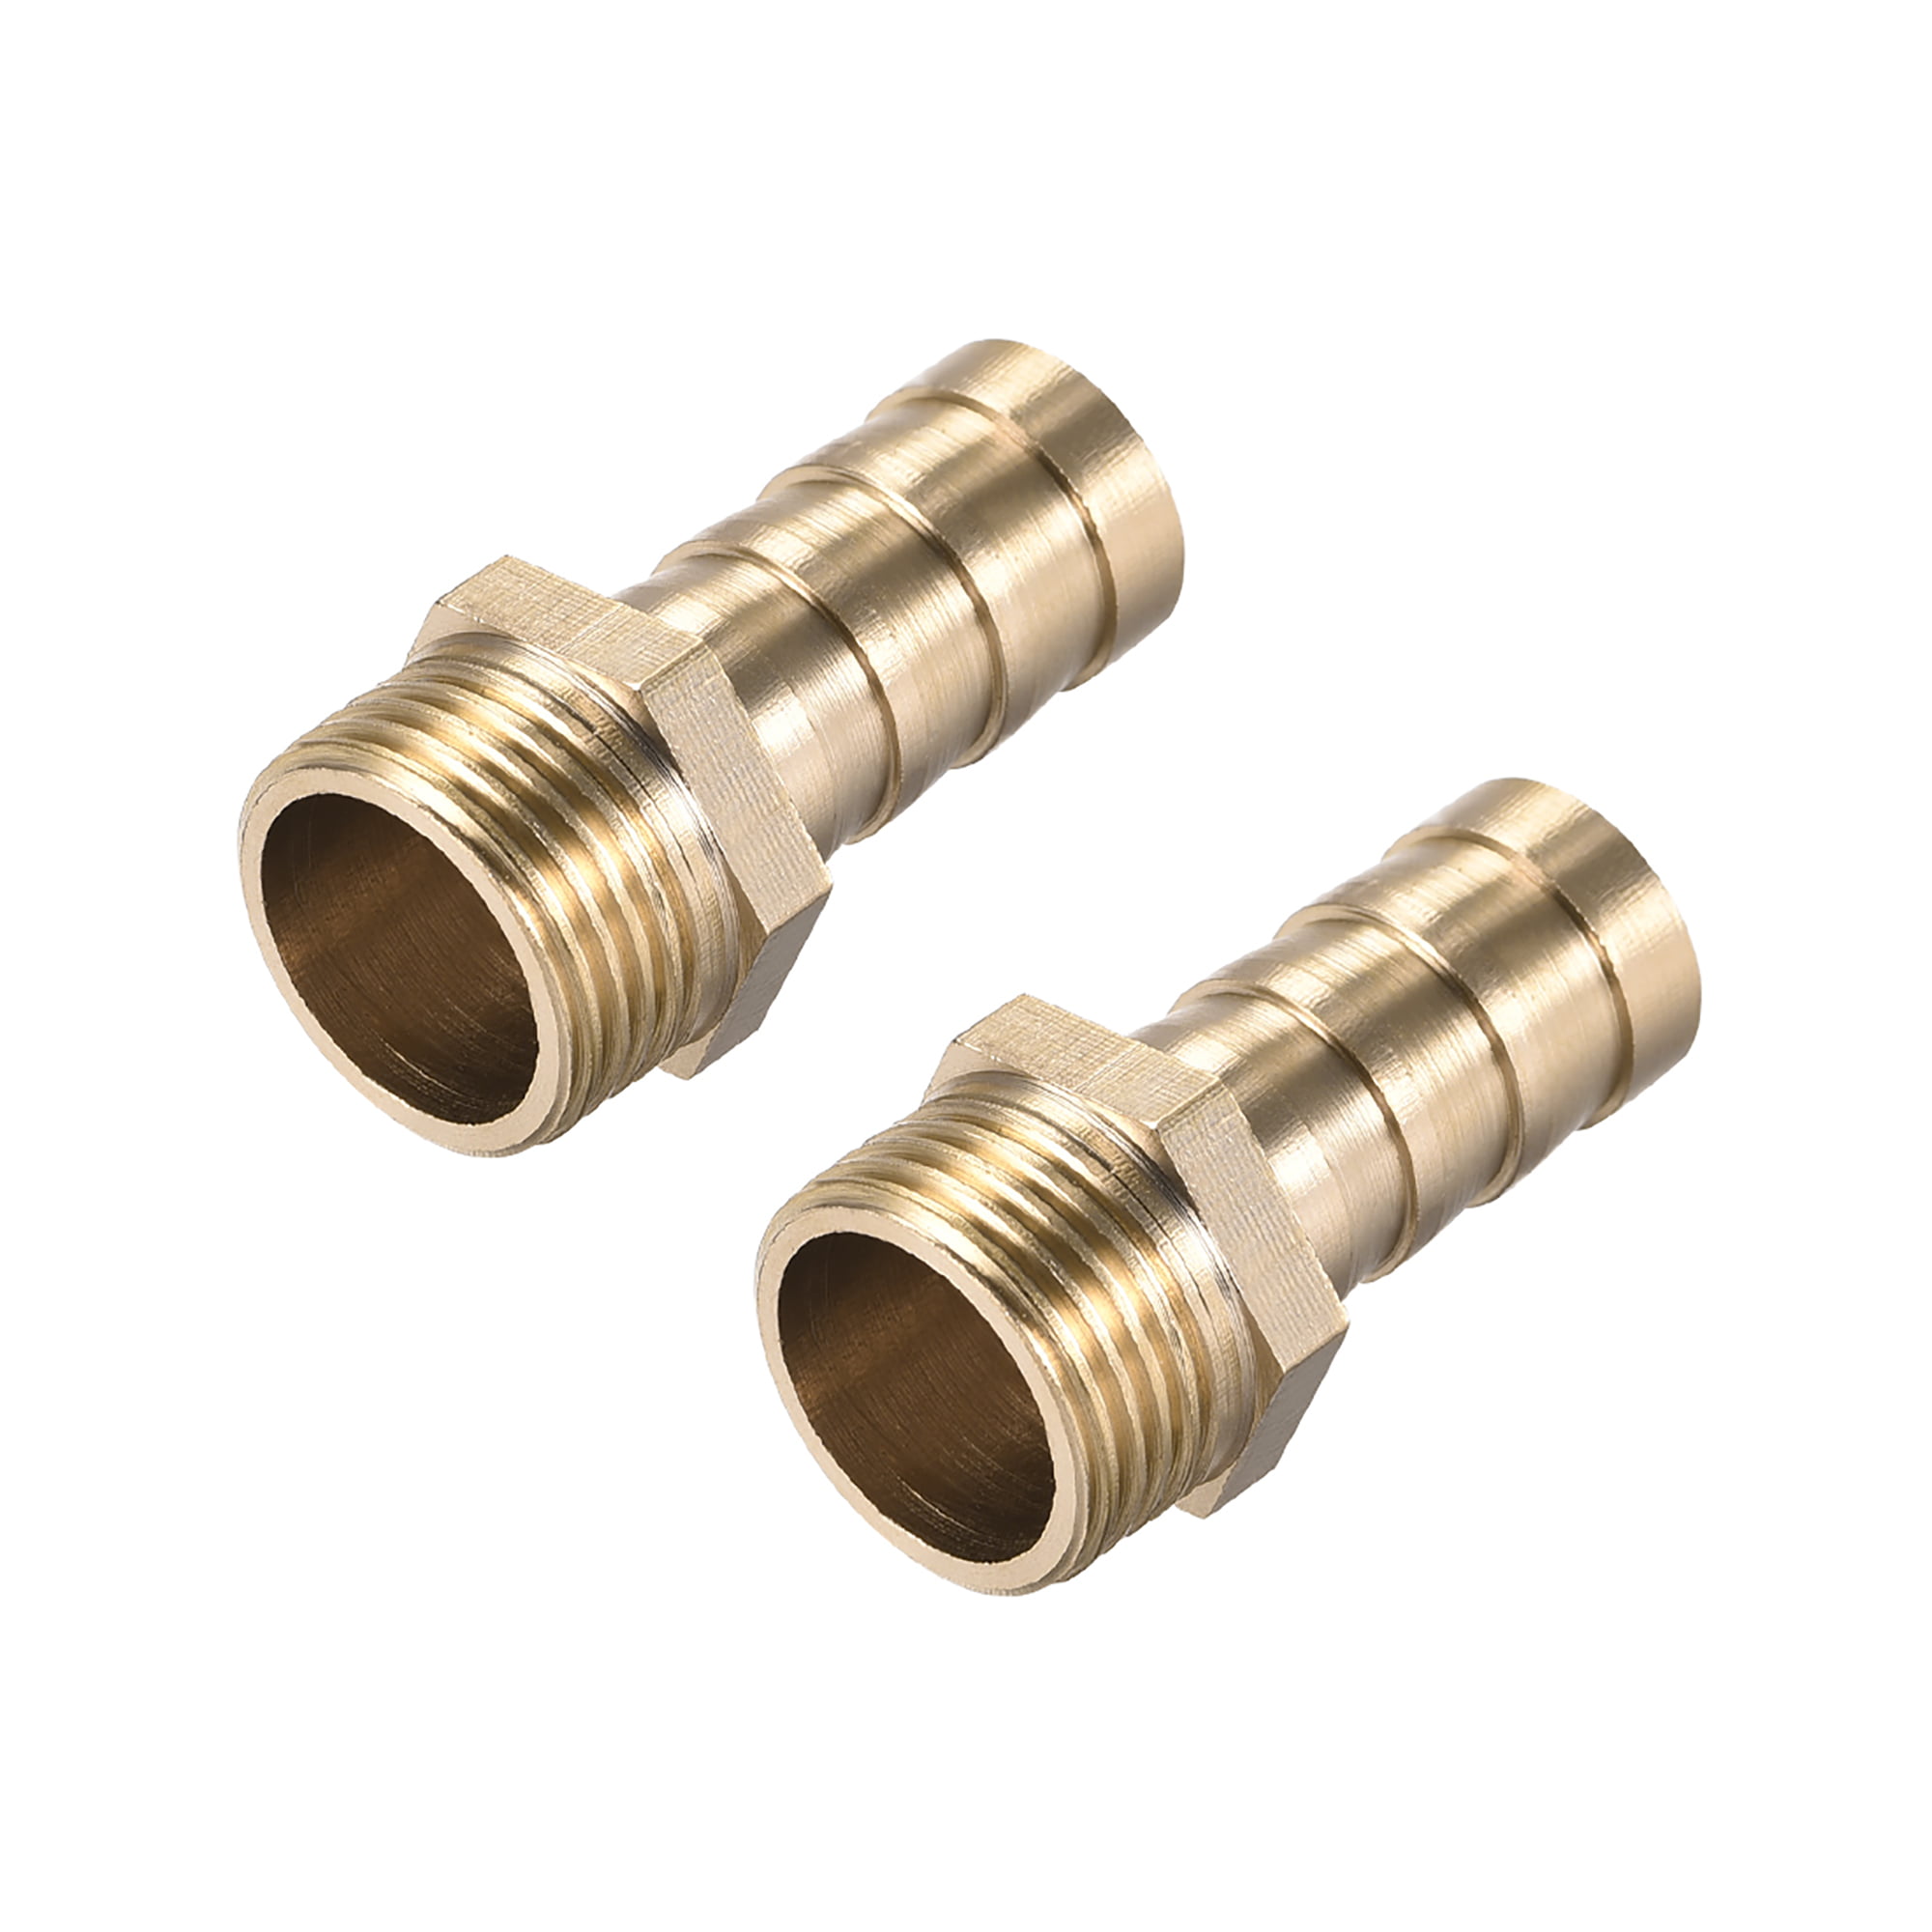 12mm 5pcs G3/8 Male Thread Barb Connector Brass Pipe Fitting Connector 